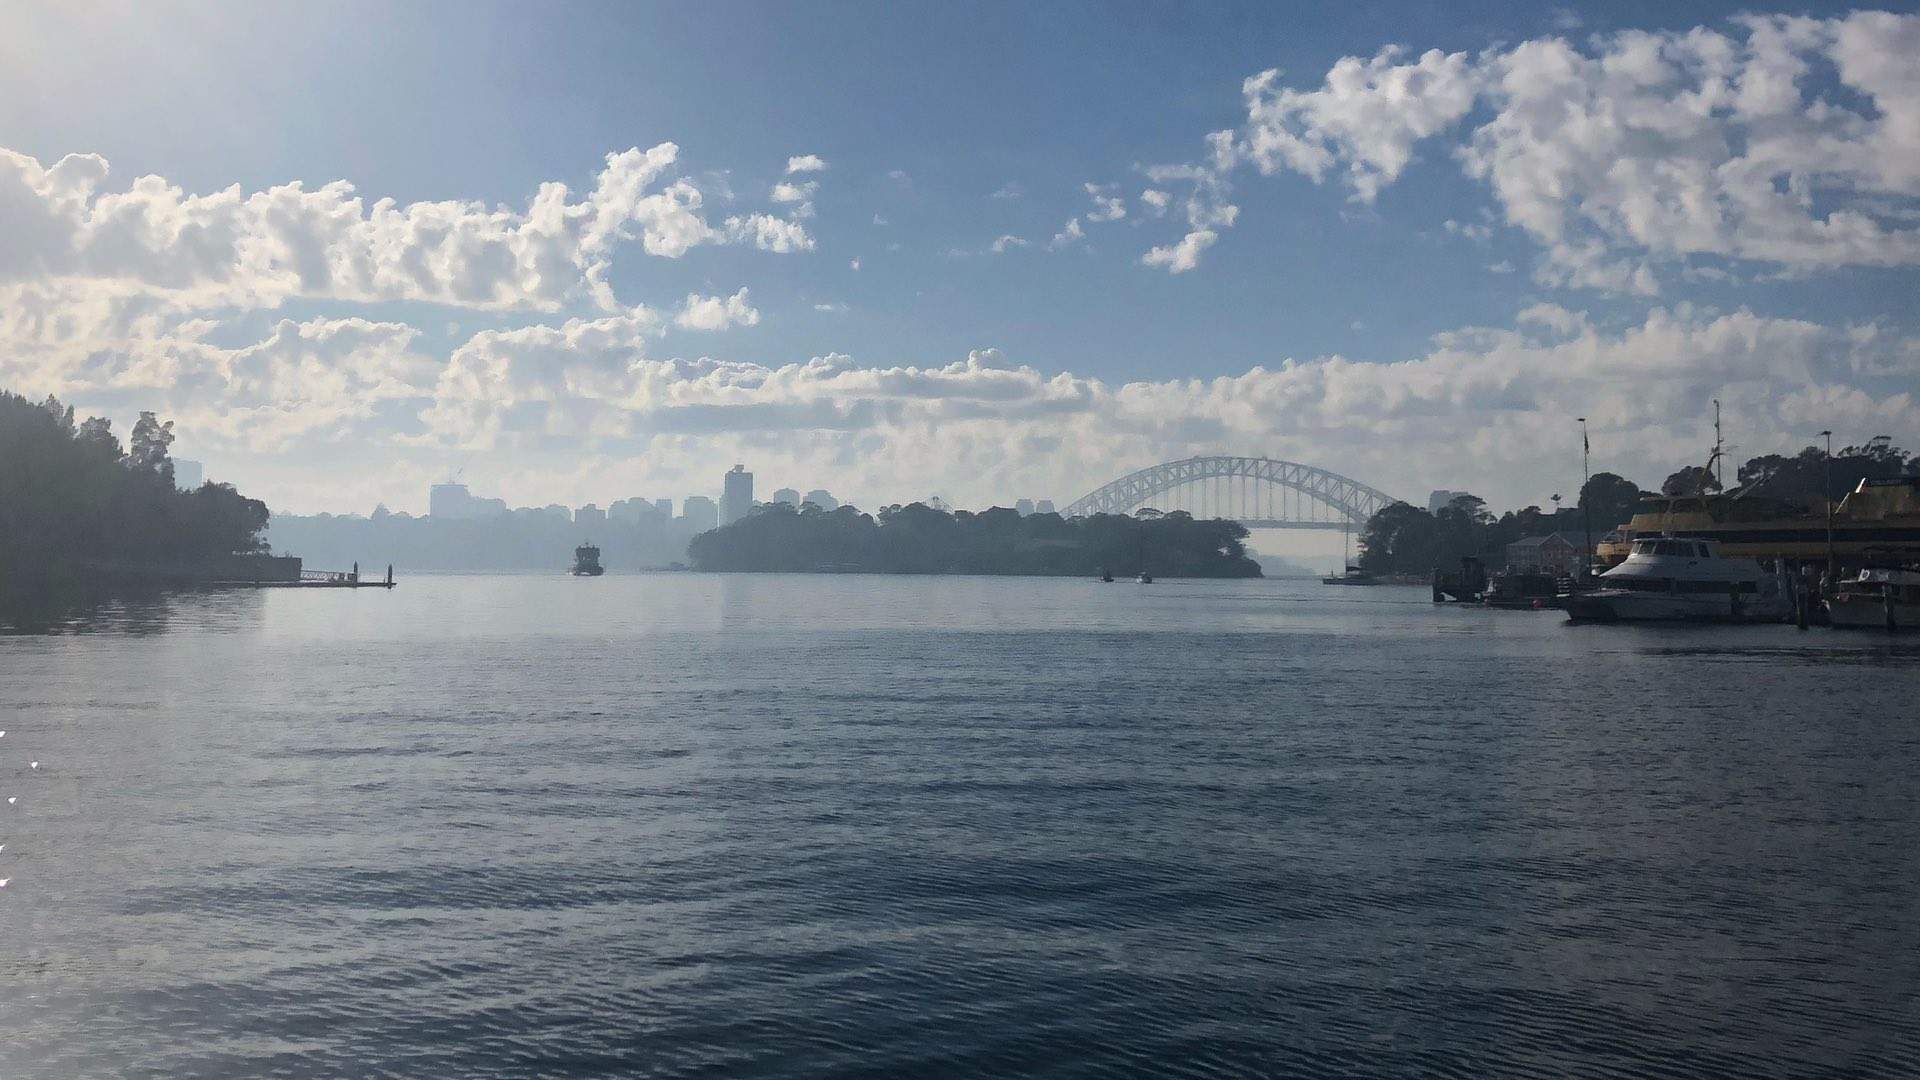 A Haze of "Hazardous" Smoke Is Currently Affecting the Air Quality in Sydney